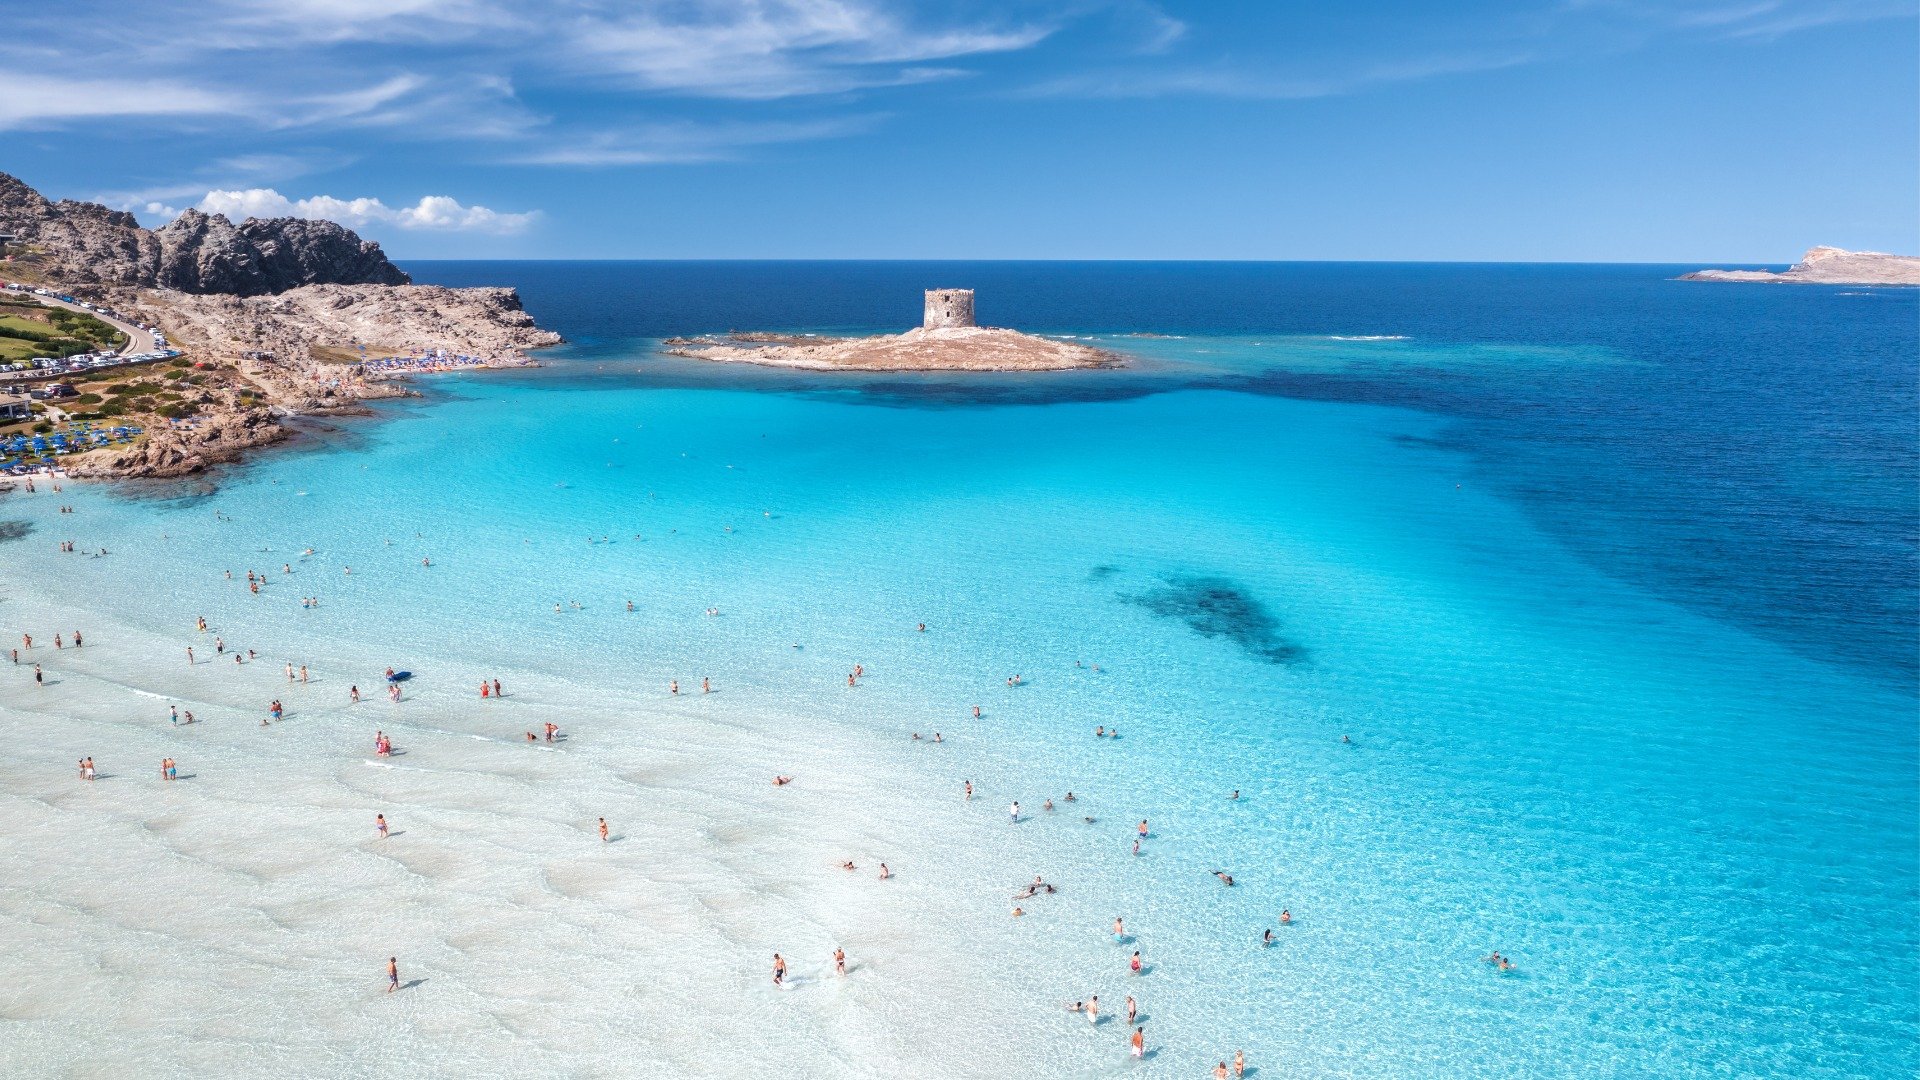 This is a panoramic shot of the transparent waters of La Pelosa Beach in Sardinia.